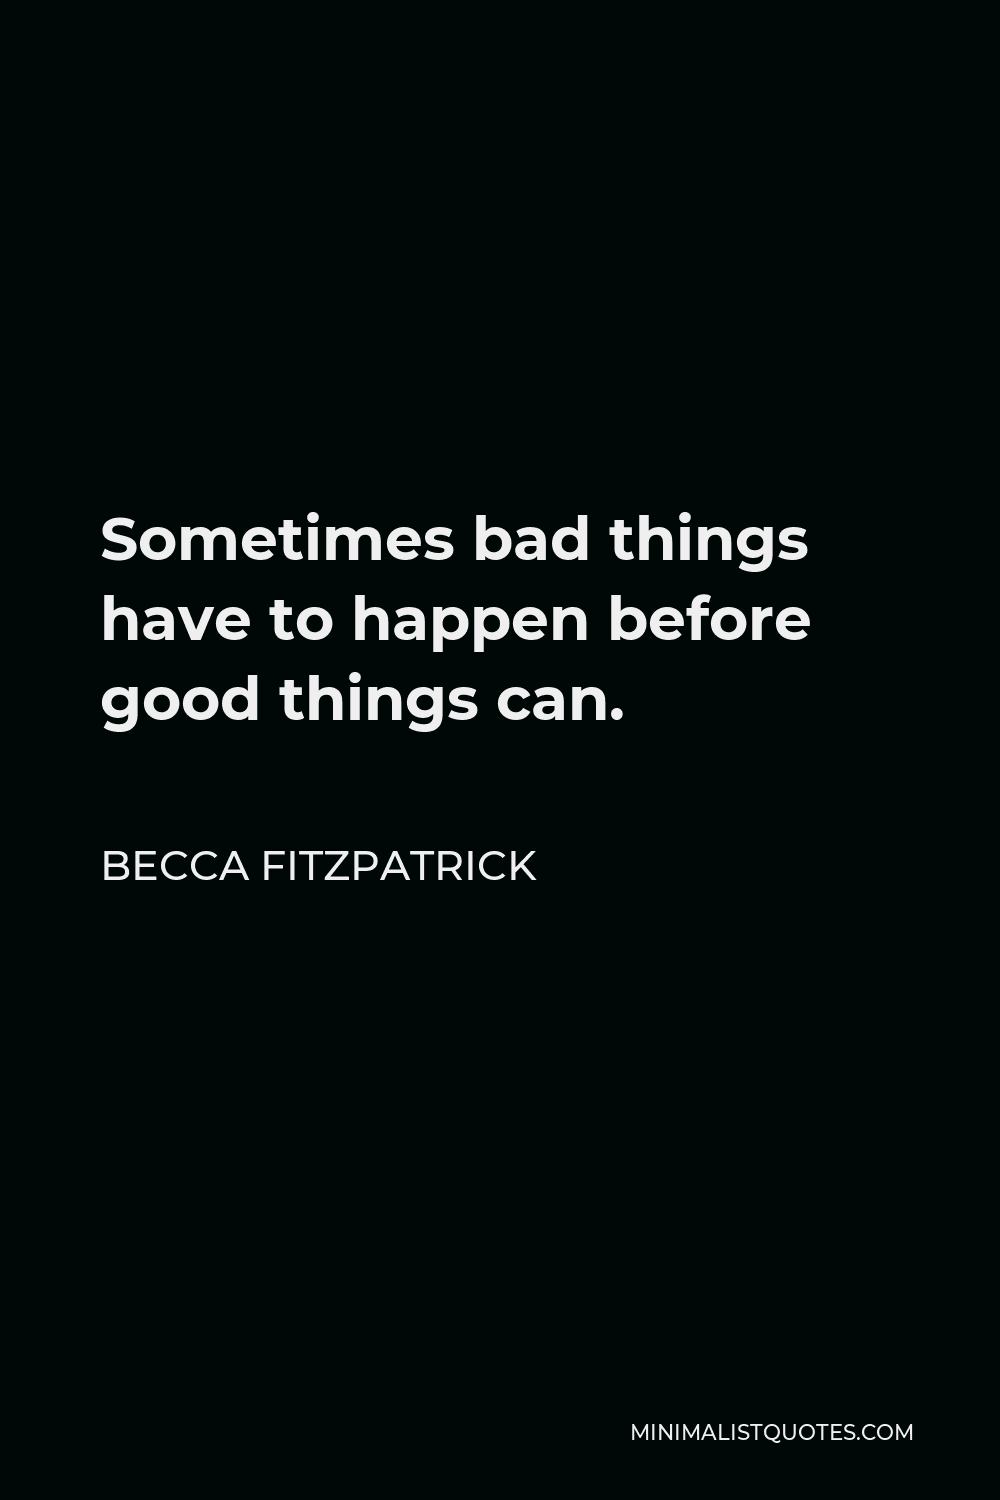 Becca Fitzpatrick Quote - Sometimes bad things have to happen before good things can.